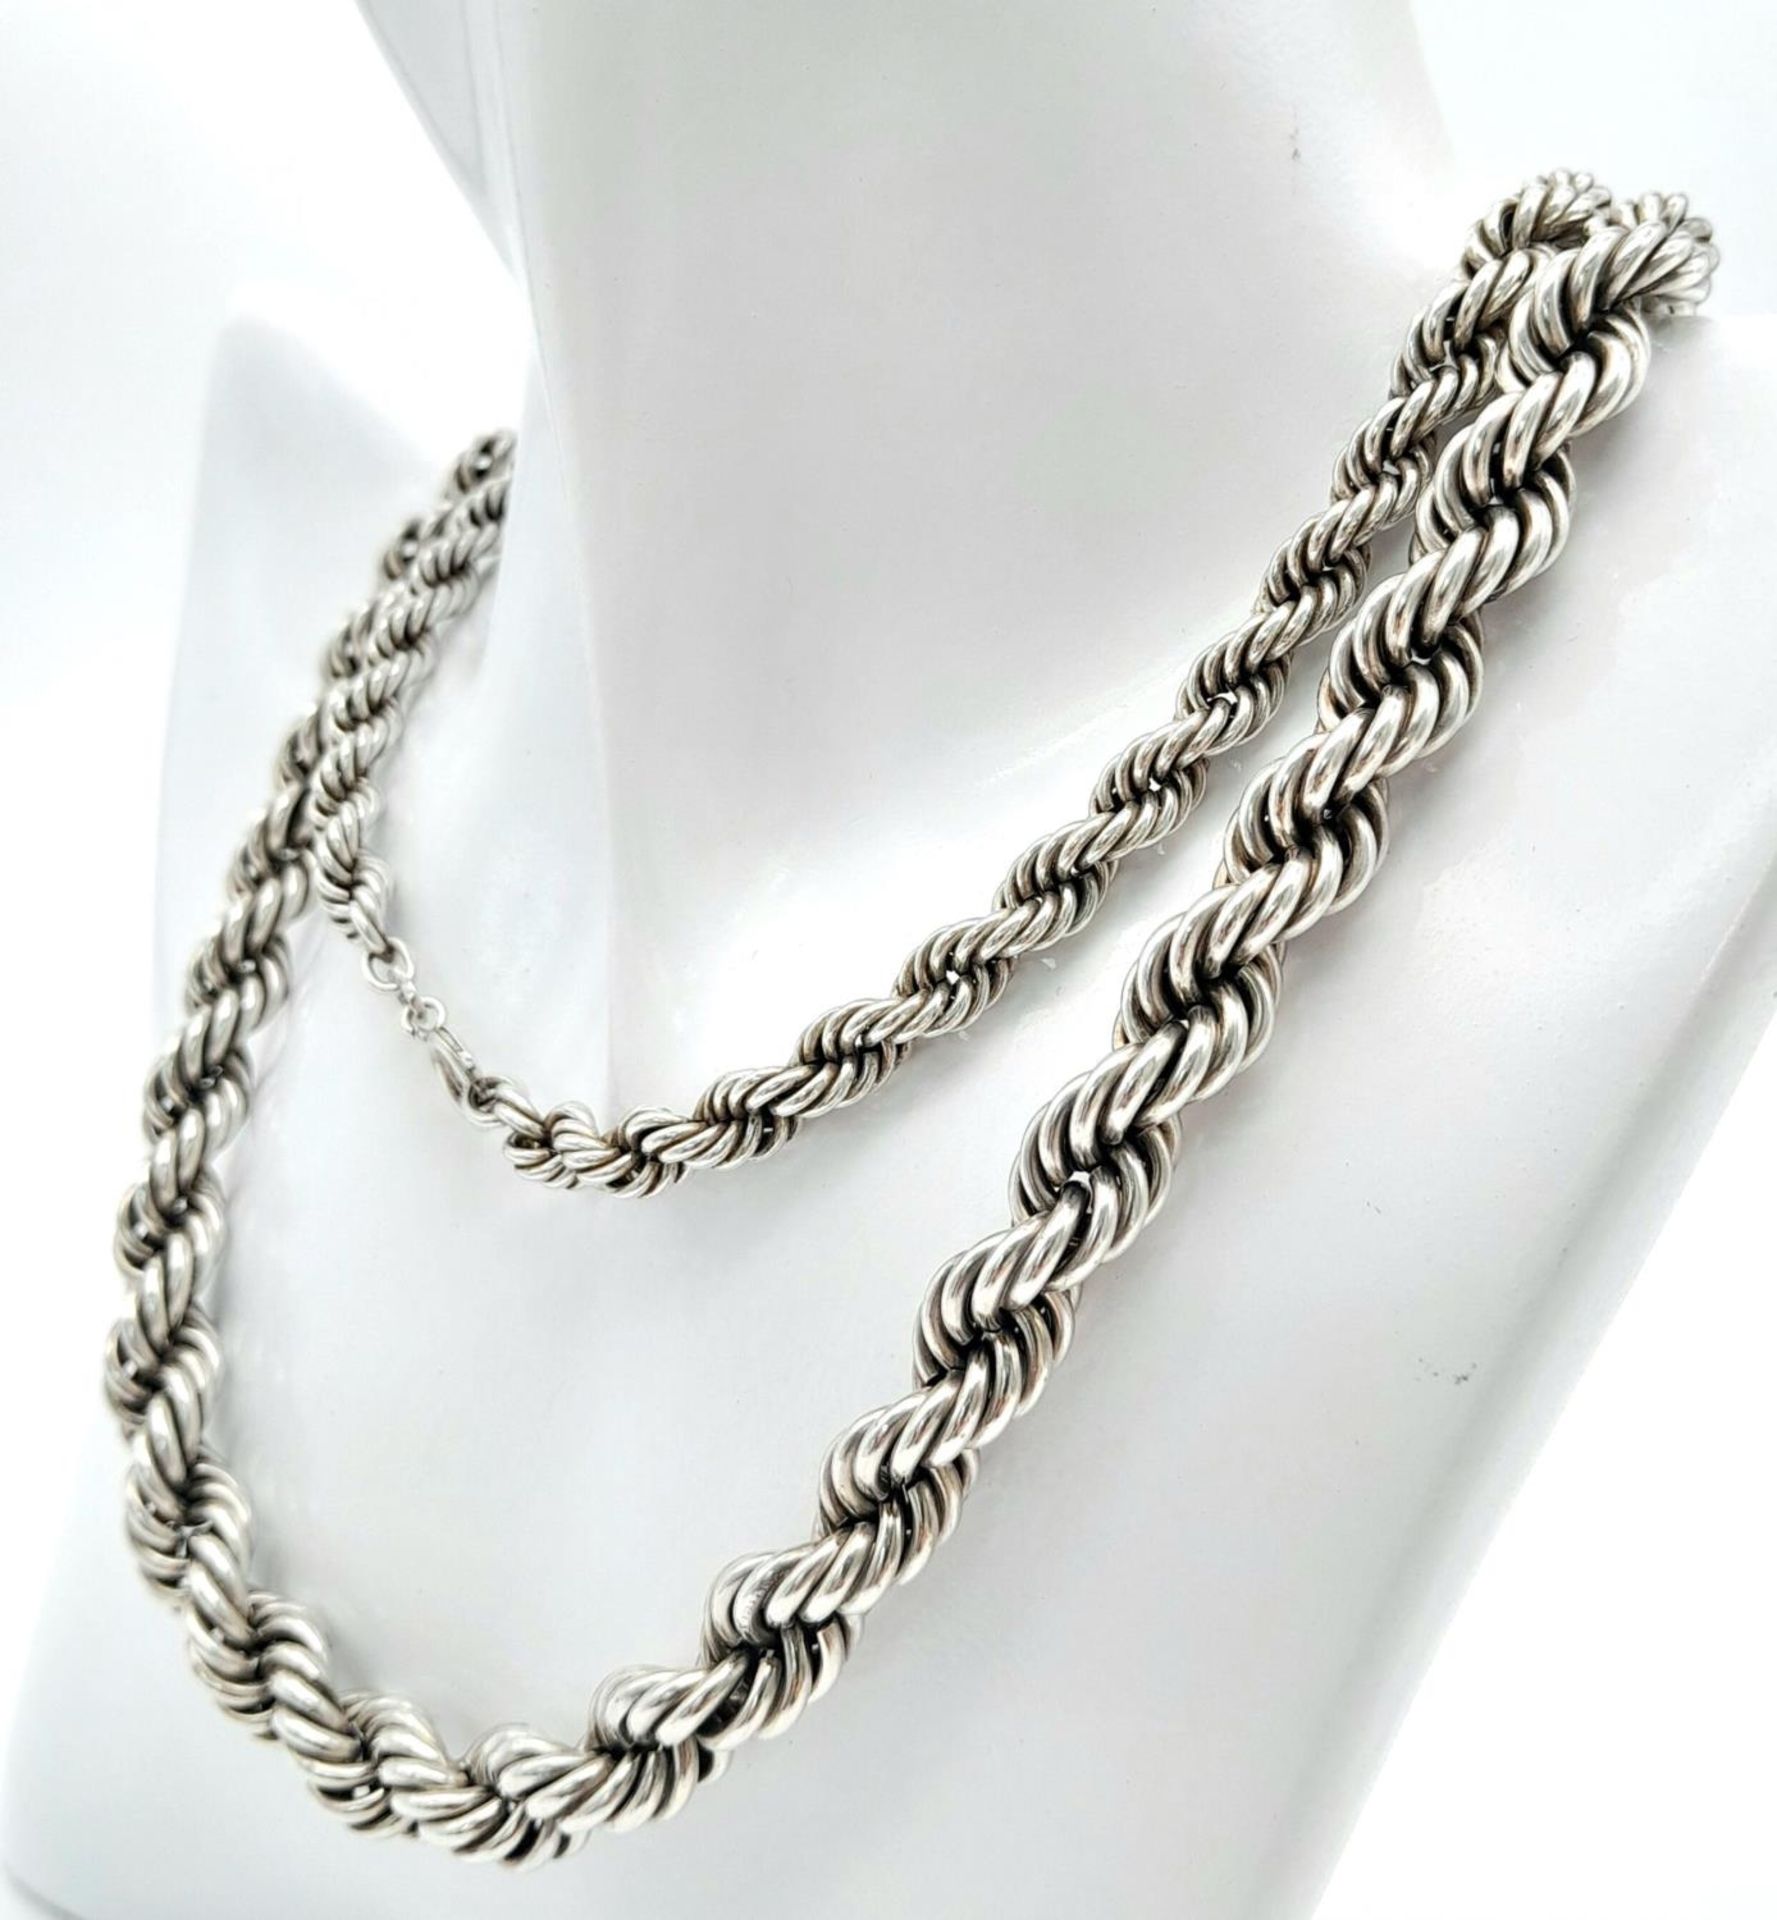 A 925 Silver Graduated Rope Chain Necklace. 89cm length, 80.48g weight. - Image 3 of 6